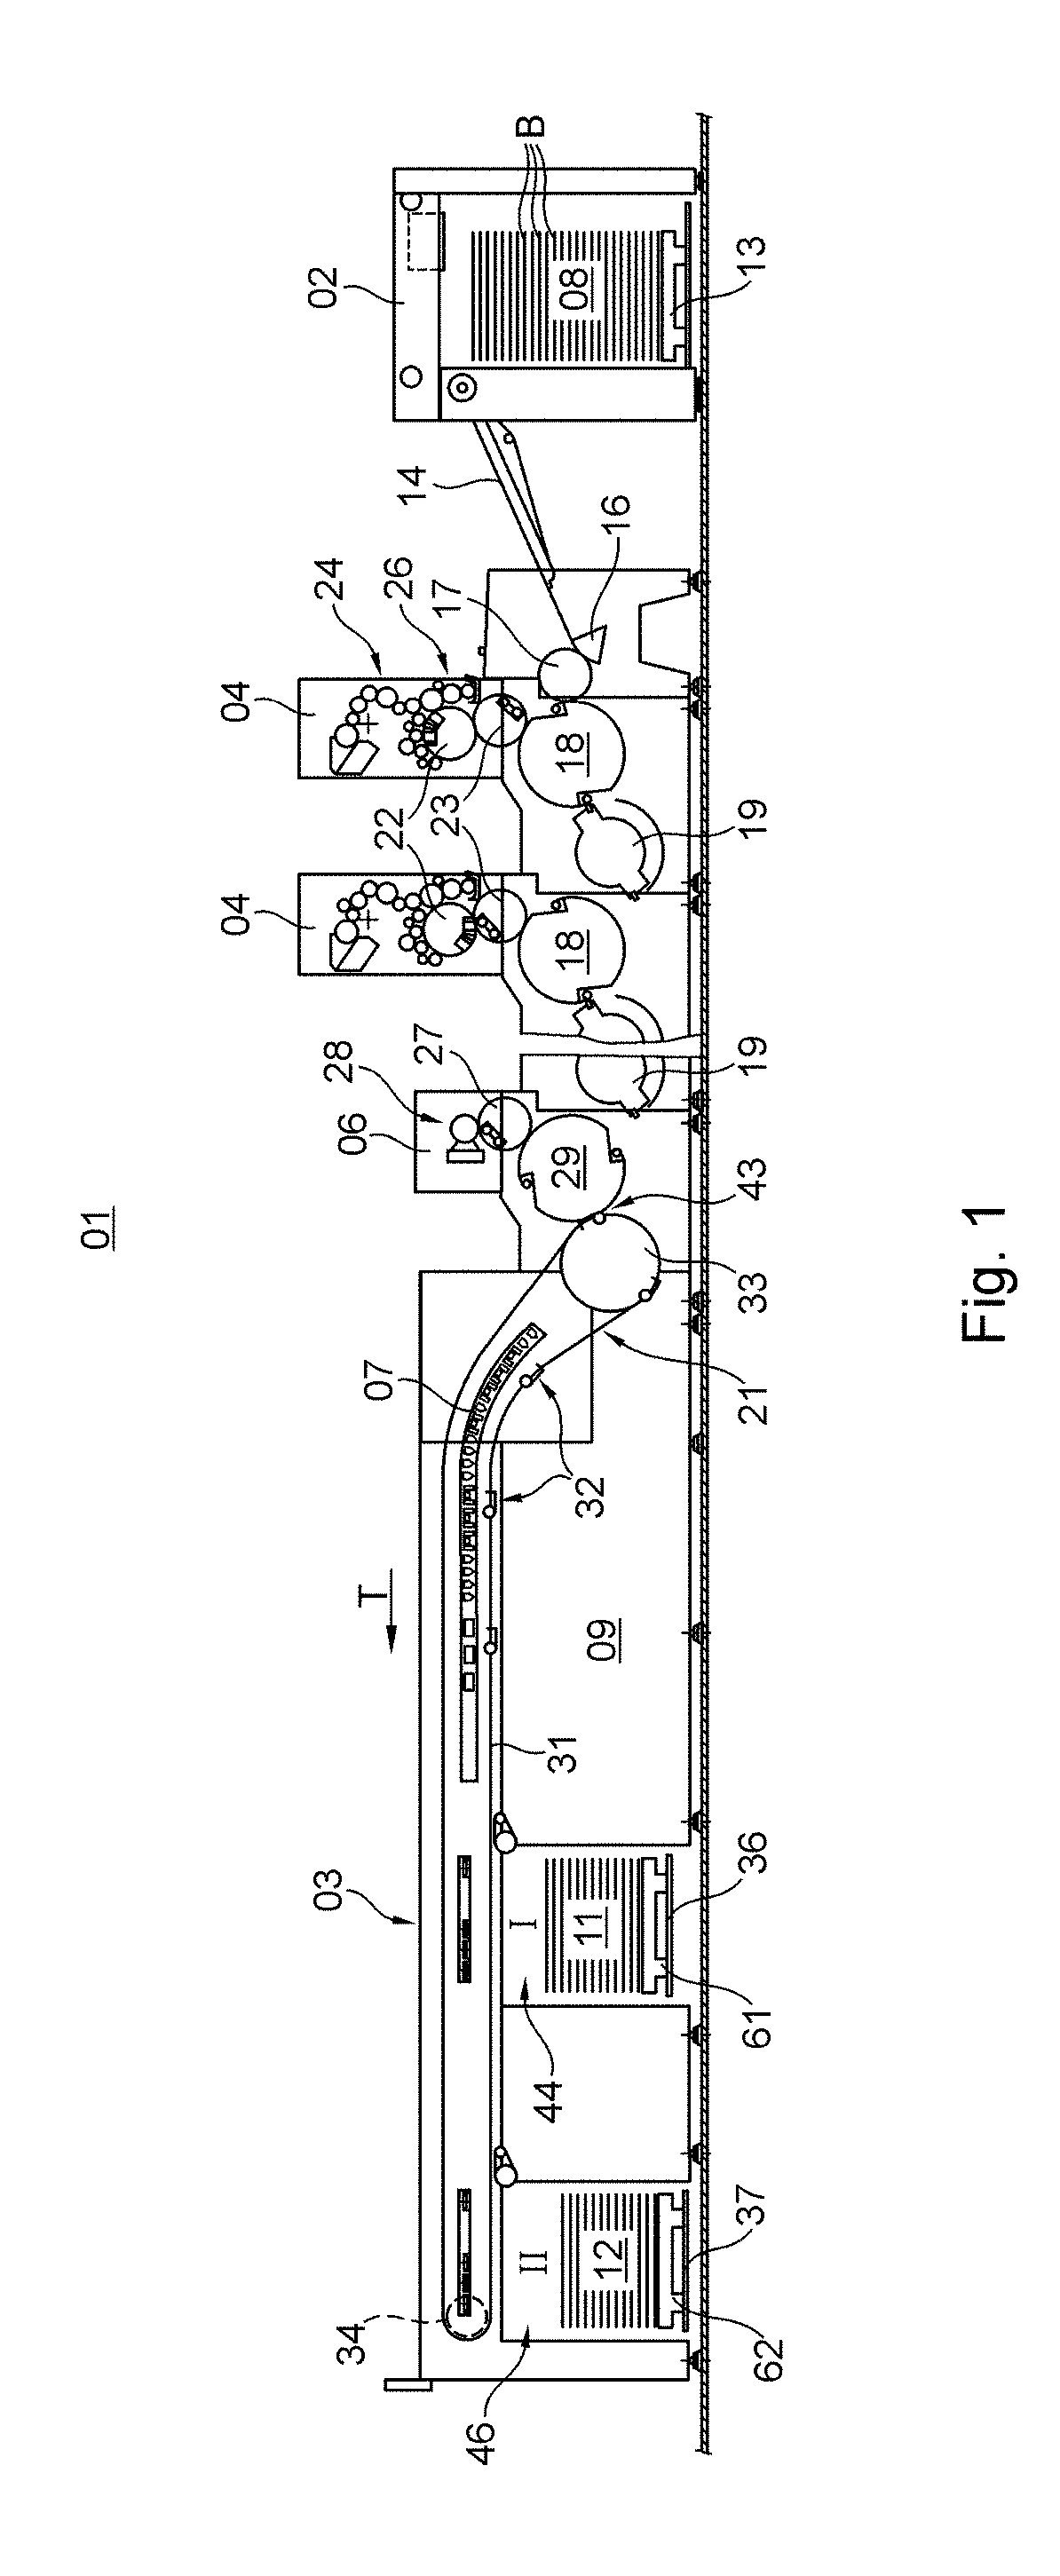 Delivery device and method for operating a delivery device